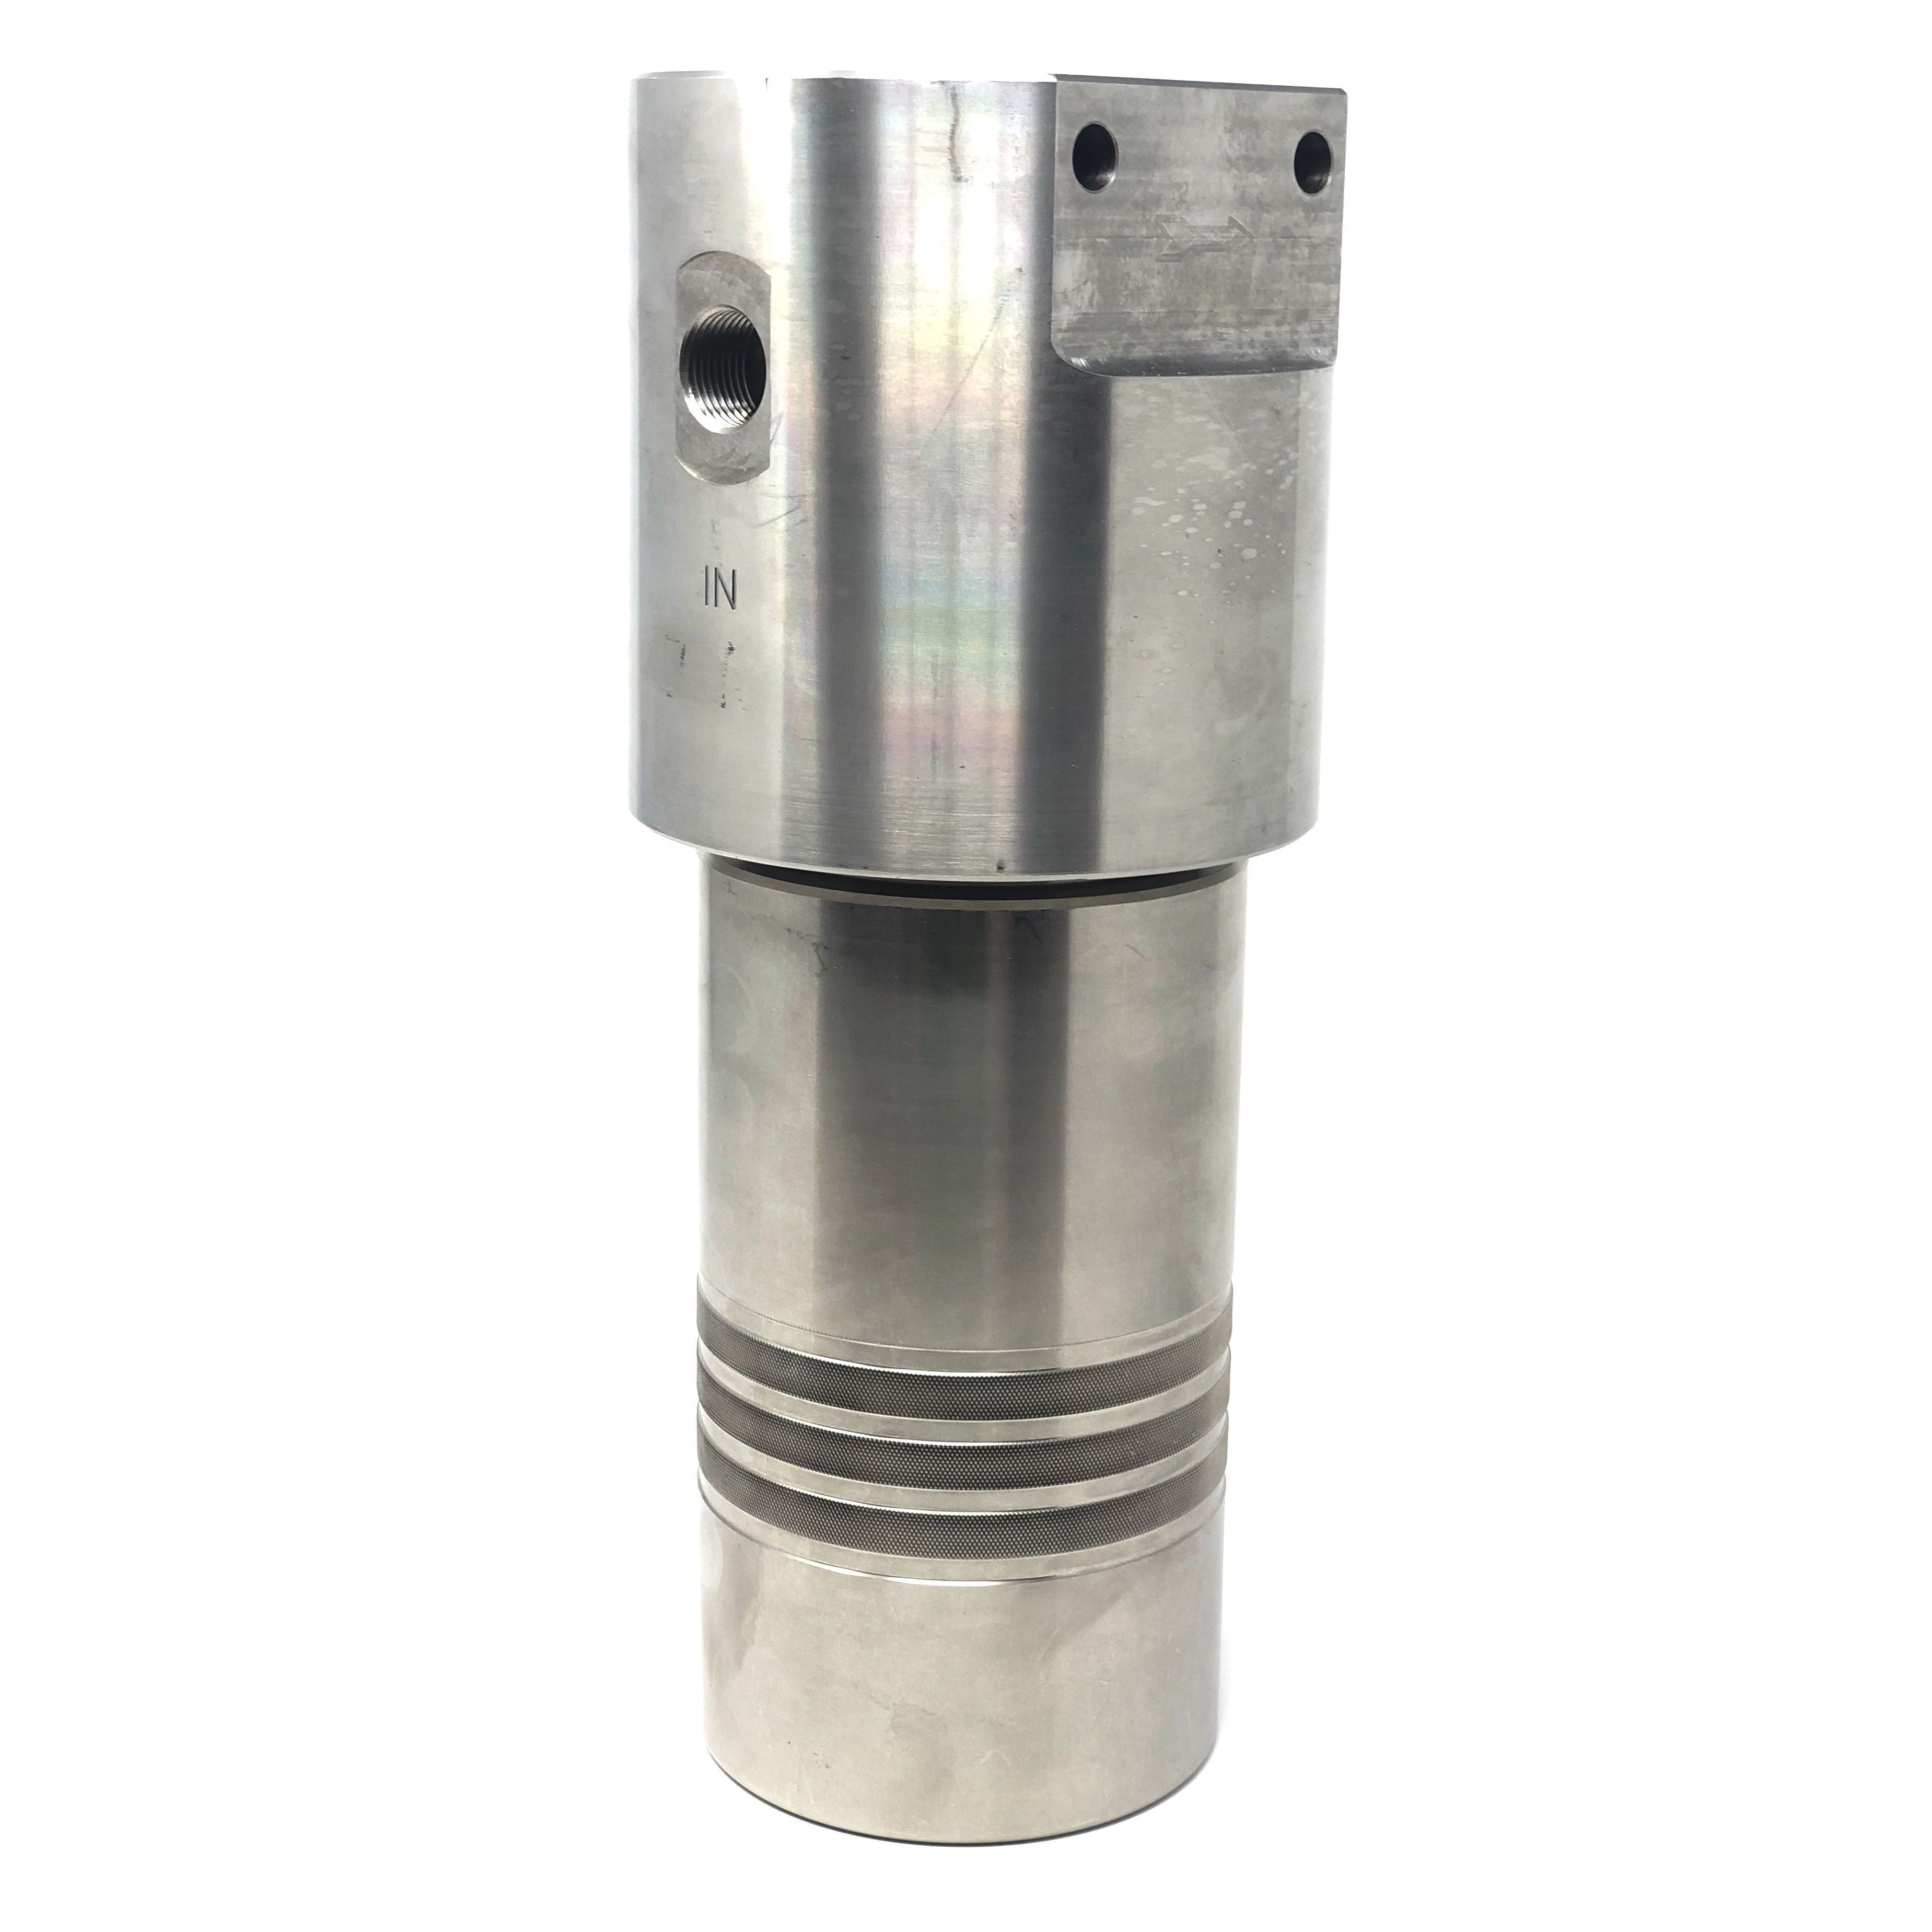 52S-248N-25SEN : Chase Ultra High Pressure Inline Filter, 10000psi, 1/2" NPT, 25 Micron, With Visual Indicator, No Bypass